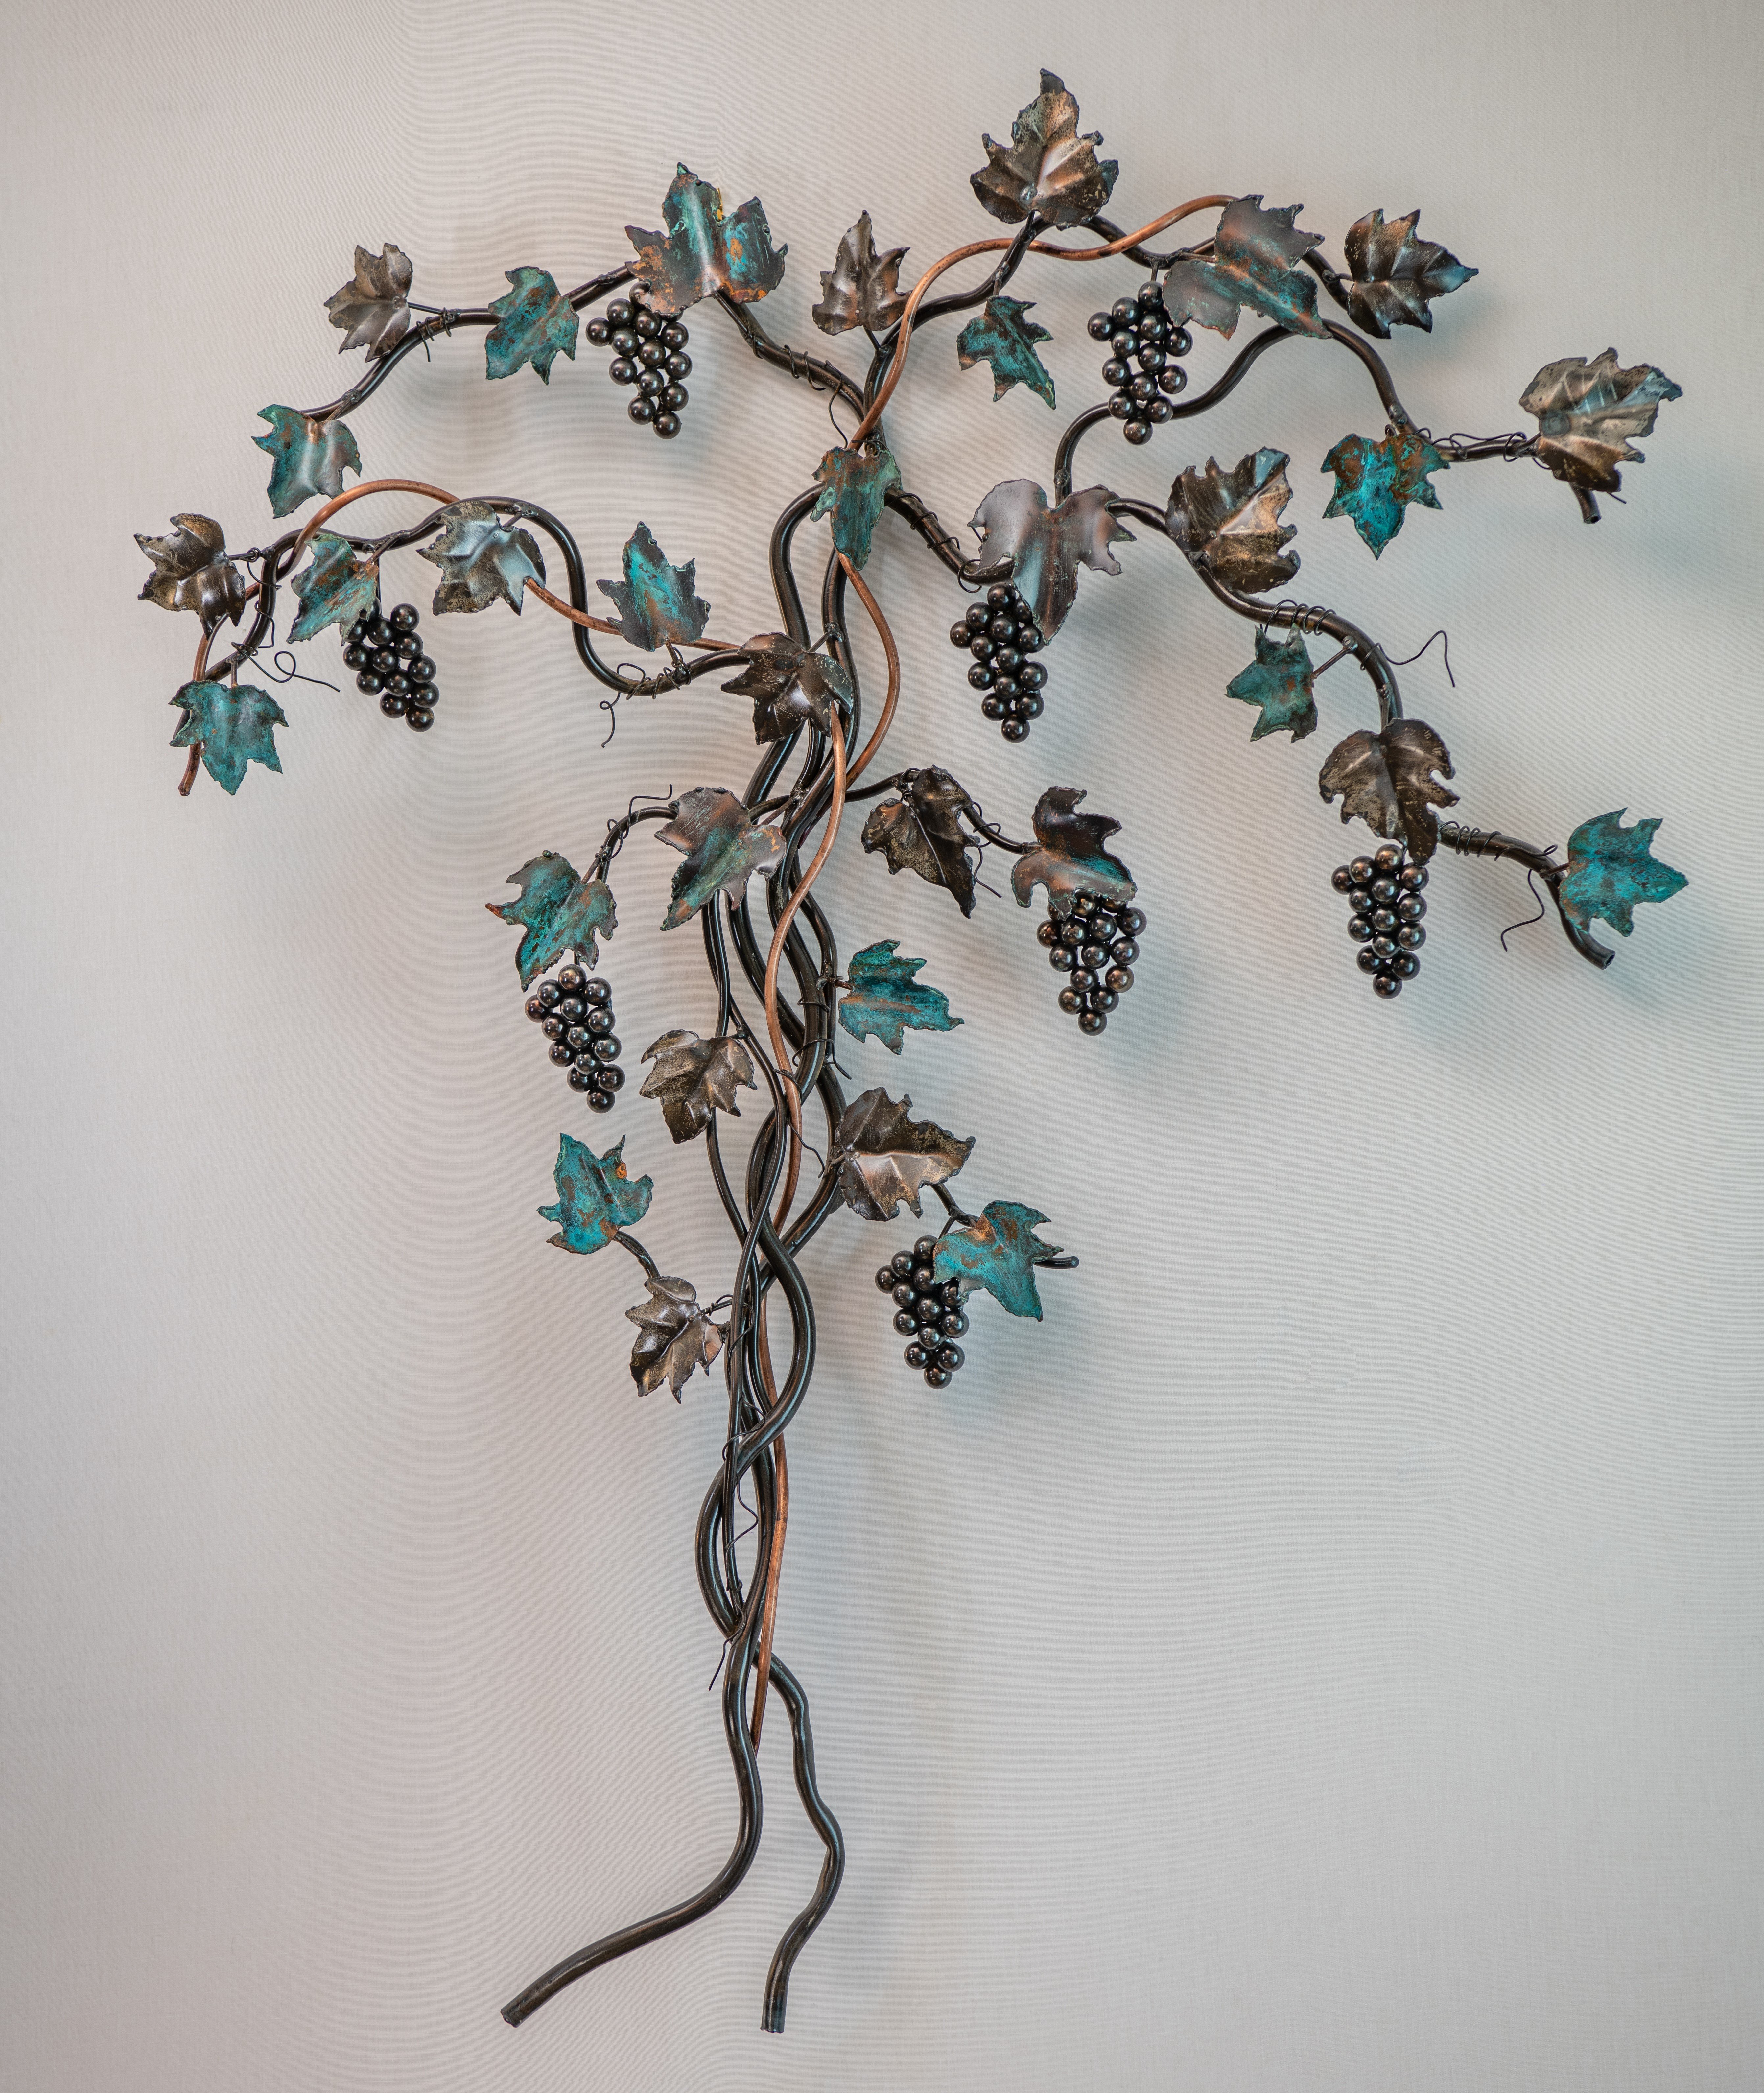 Stephen Maresco; Grape Vine Tree, 2020, Original Sculpture Steel, 4 x 3 feet. Artwork description: 241 Steel and Copper, hand cut and ground leaves and patina finishes...